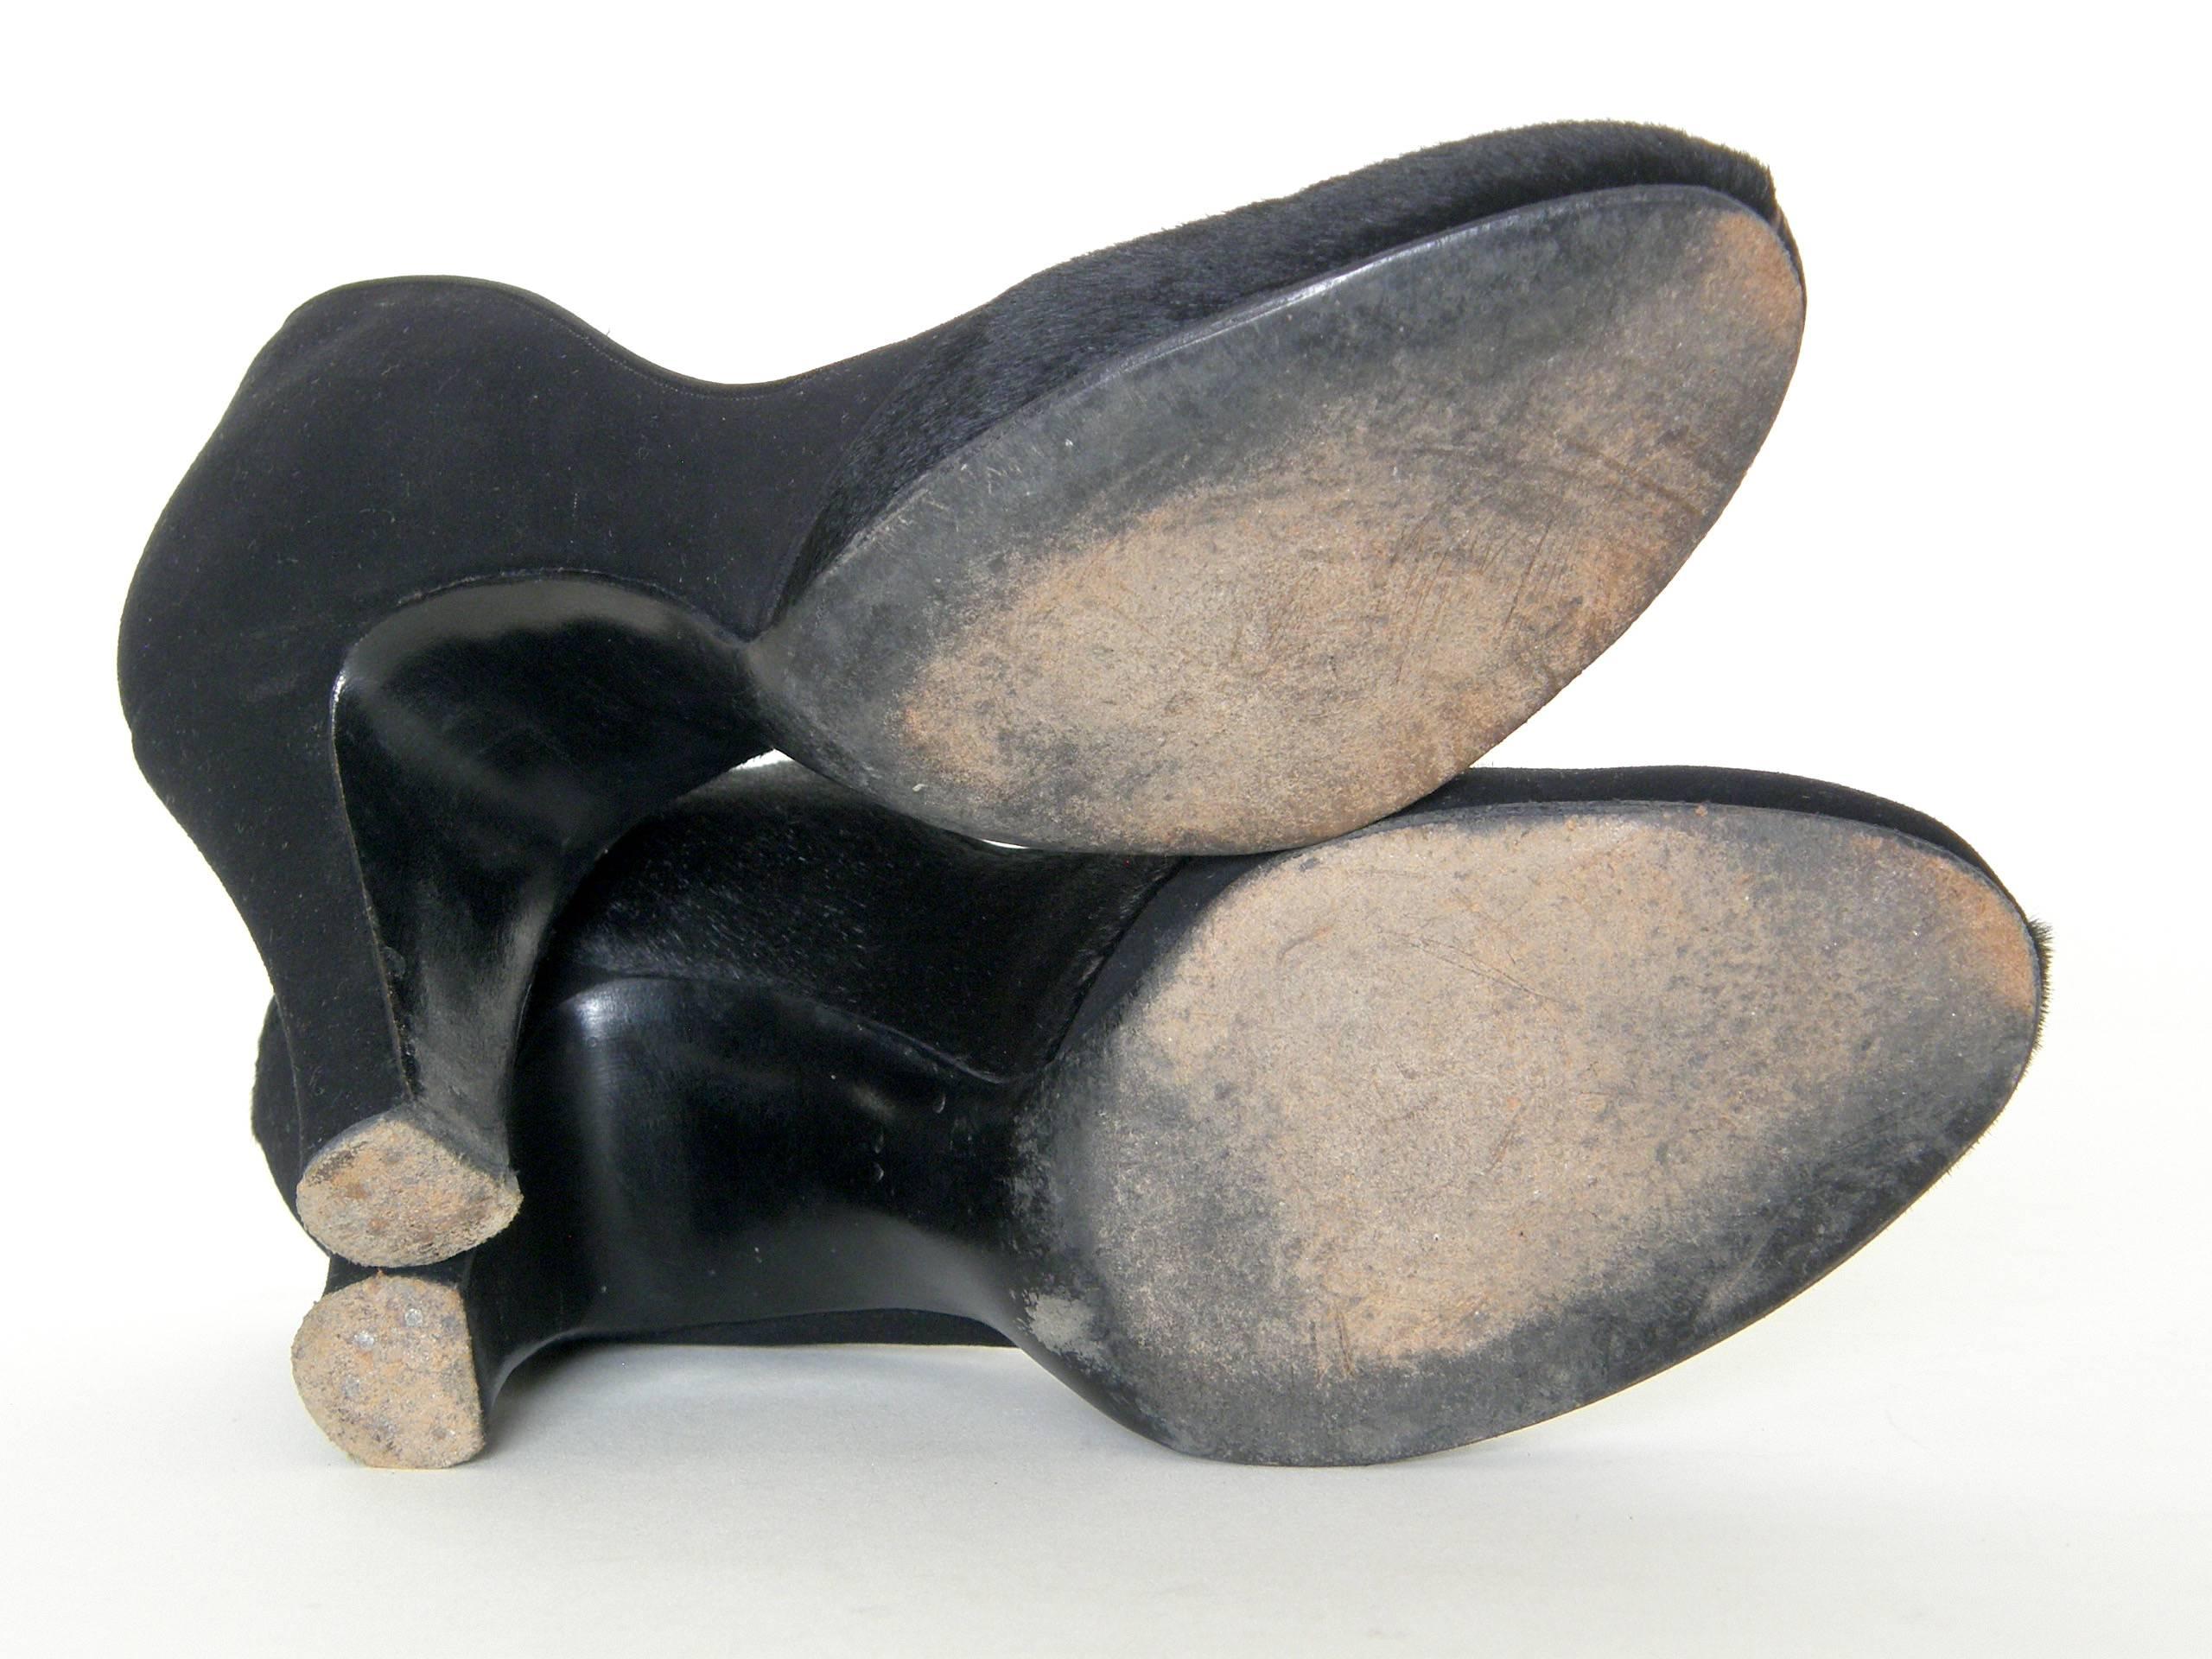 Black 1940s Wolock & Bauer Cowhide and Suede Pumps For Sale